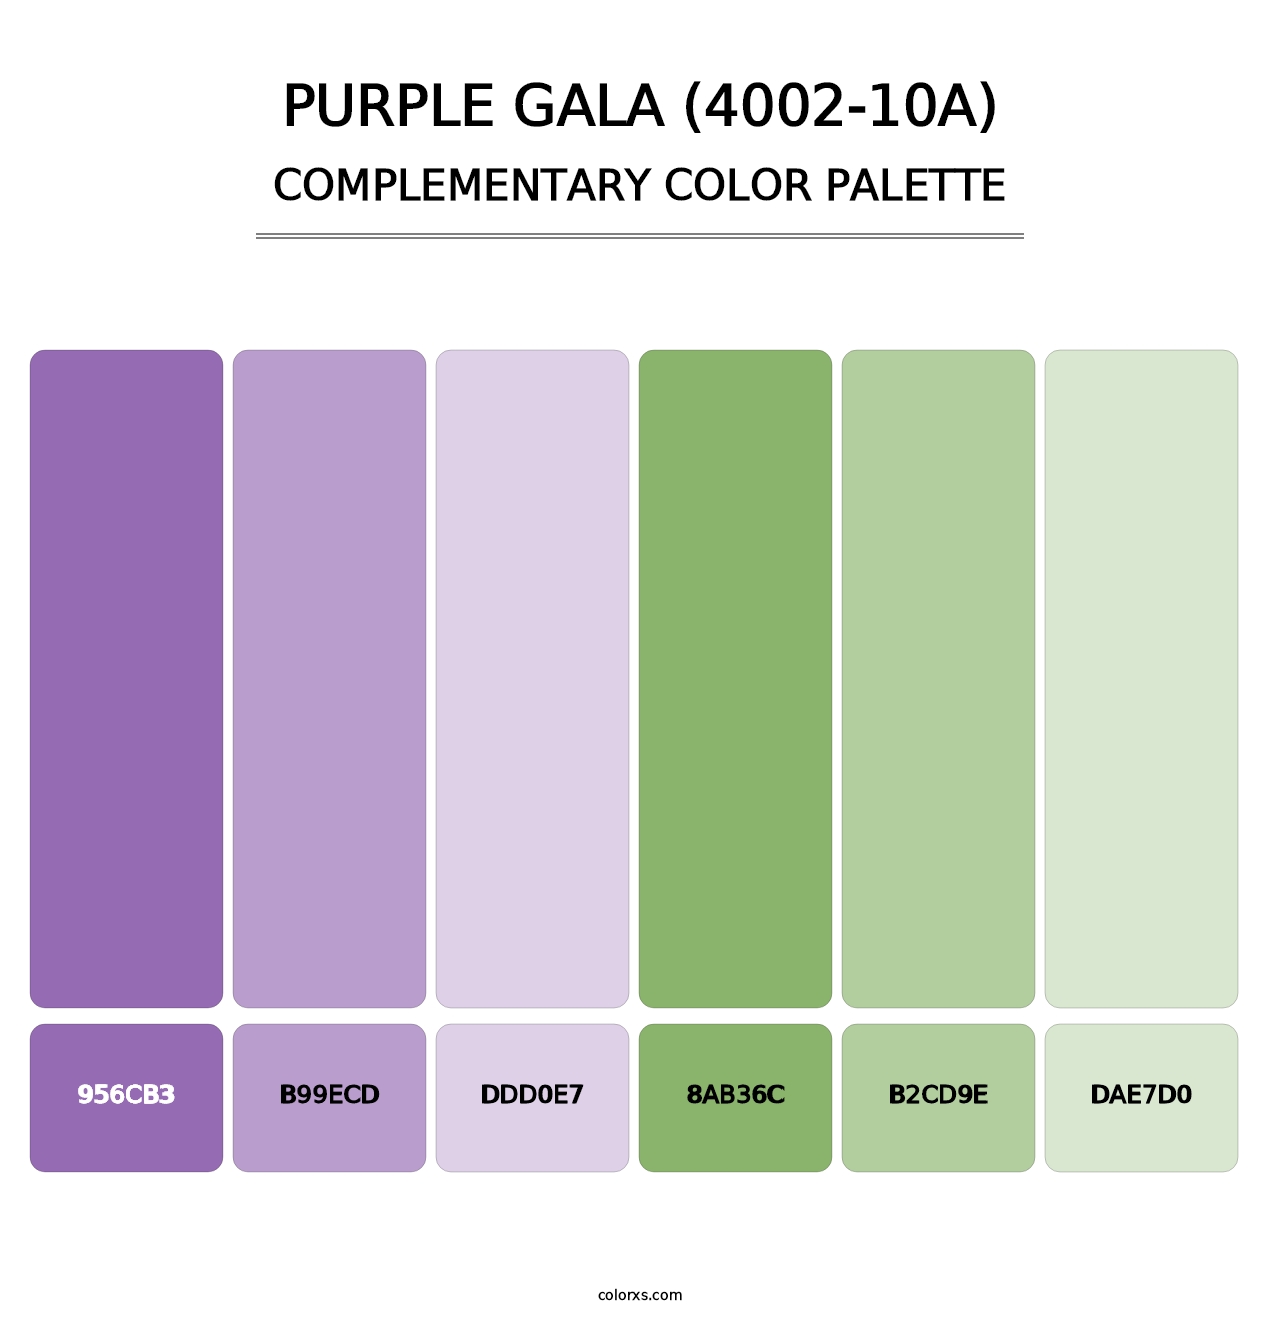 Purple Gala (4002-10A) - Complementary Color Palette